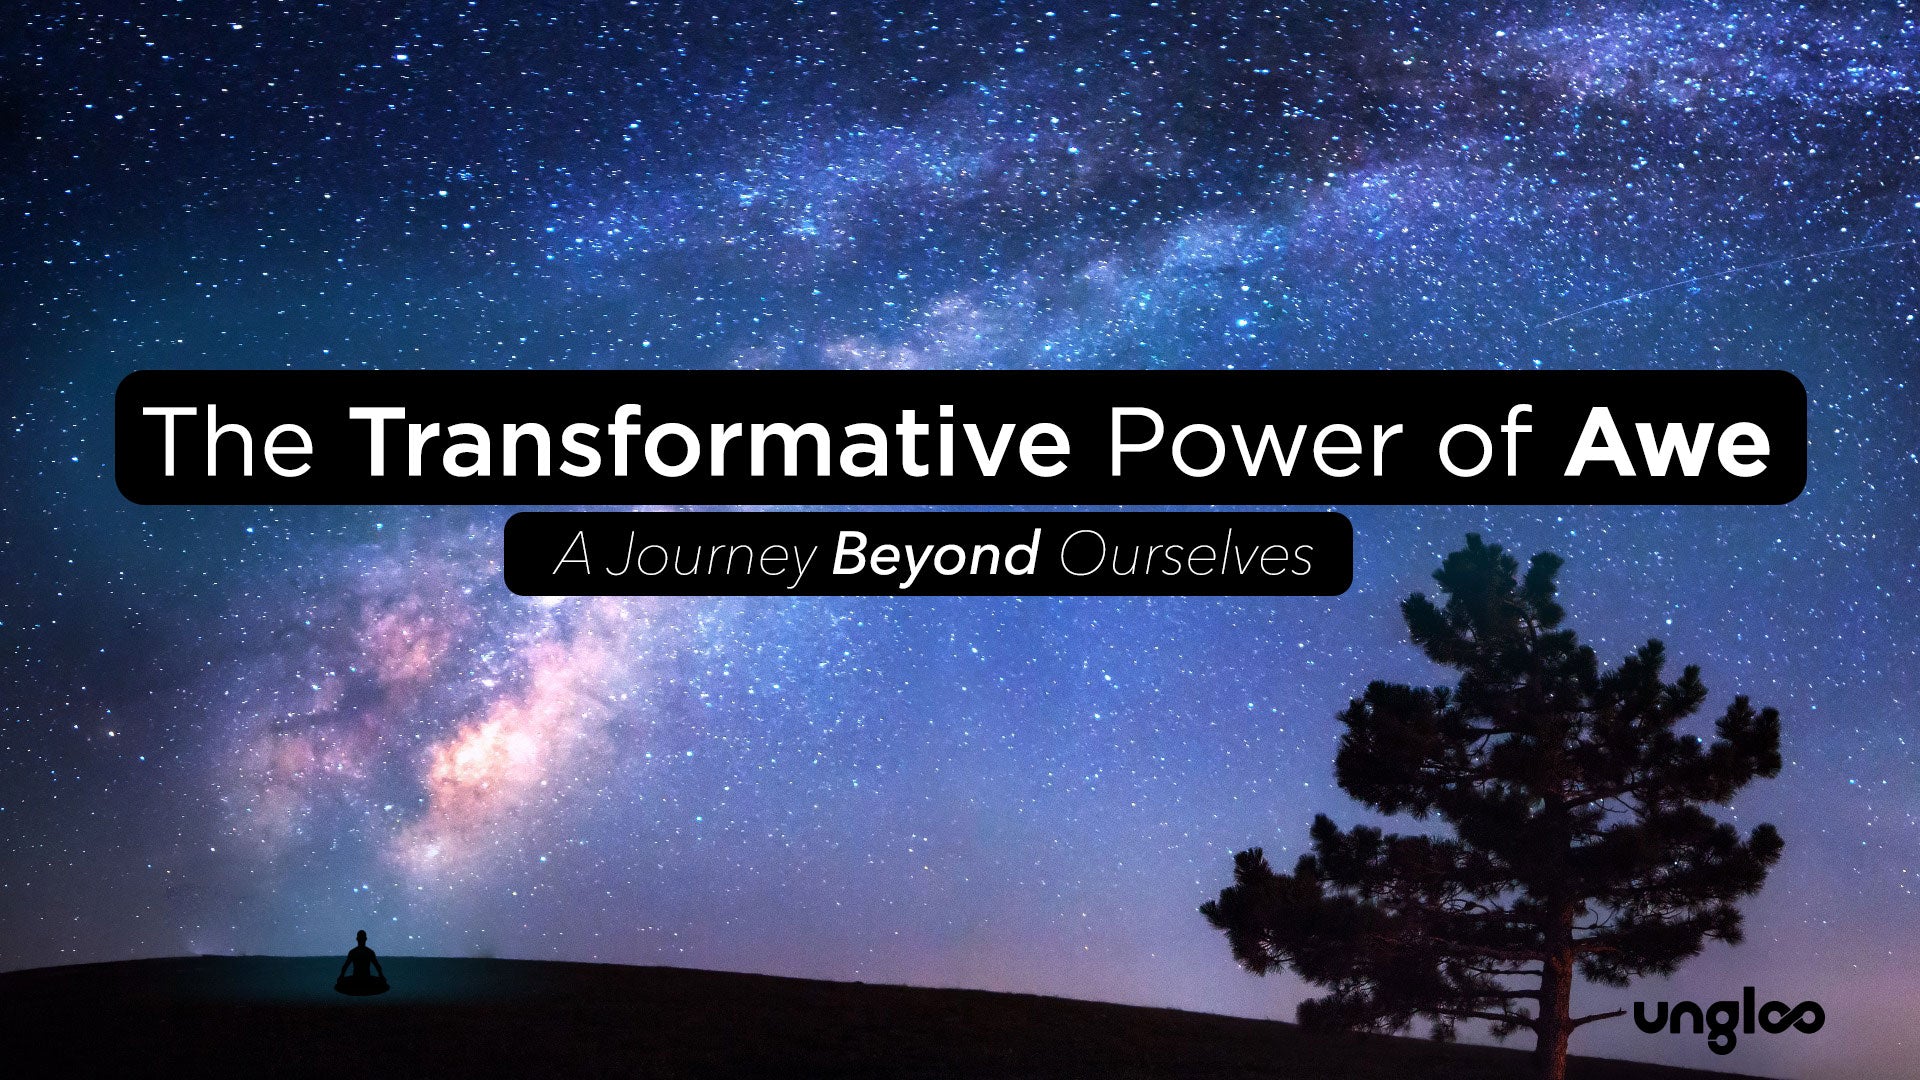 The Transformative Power of Awe